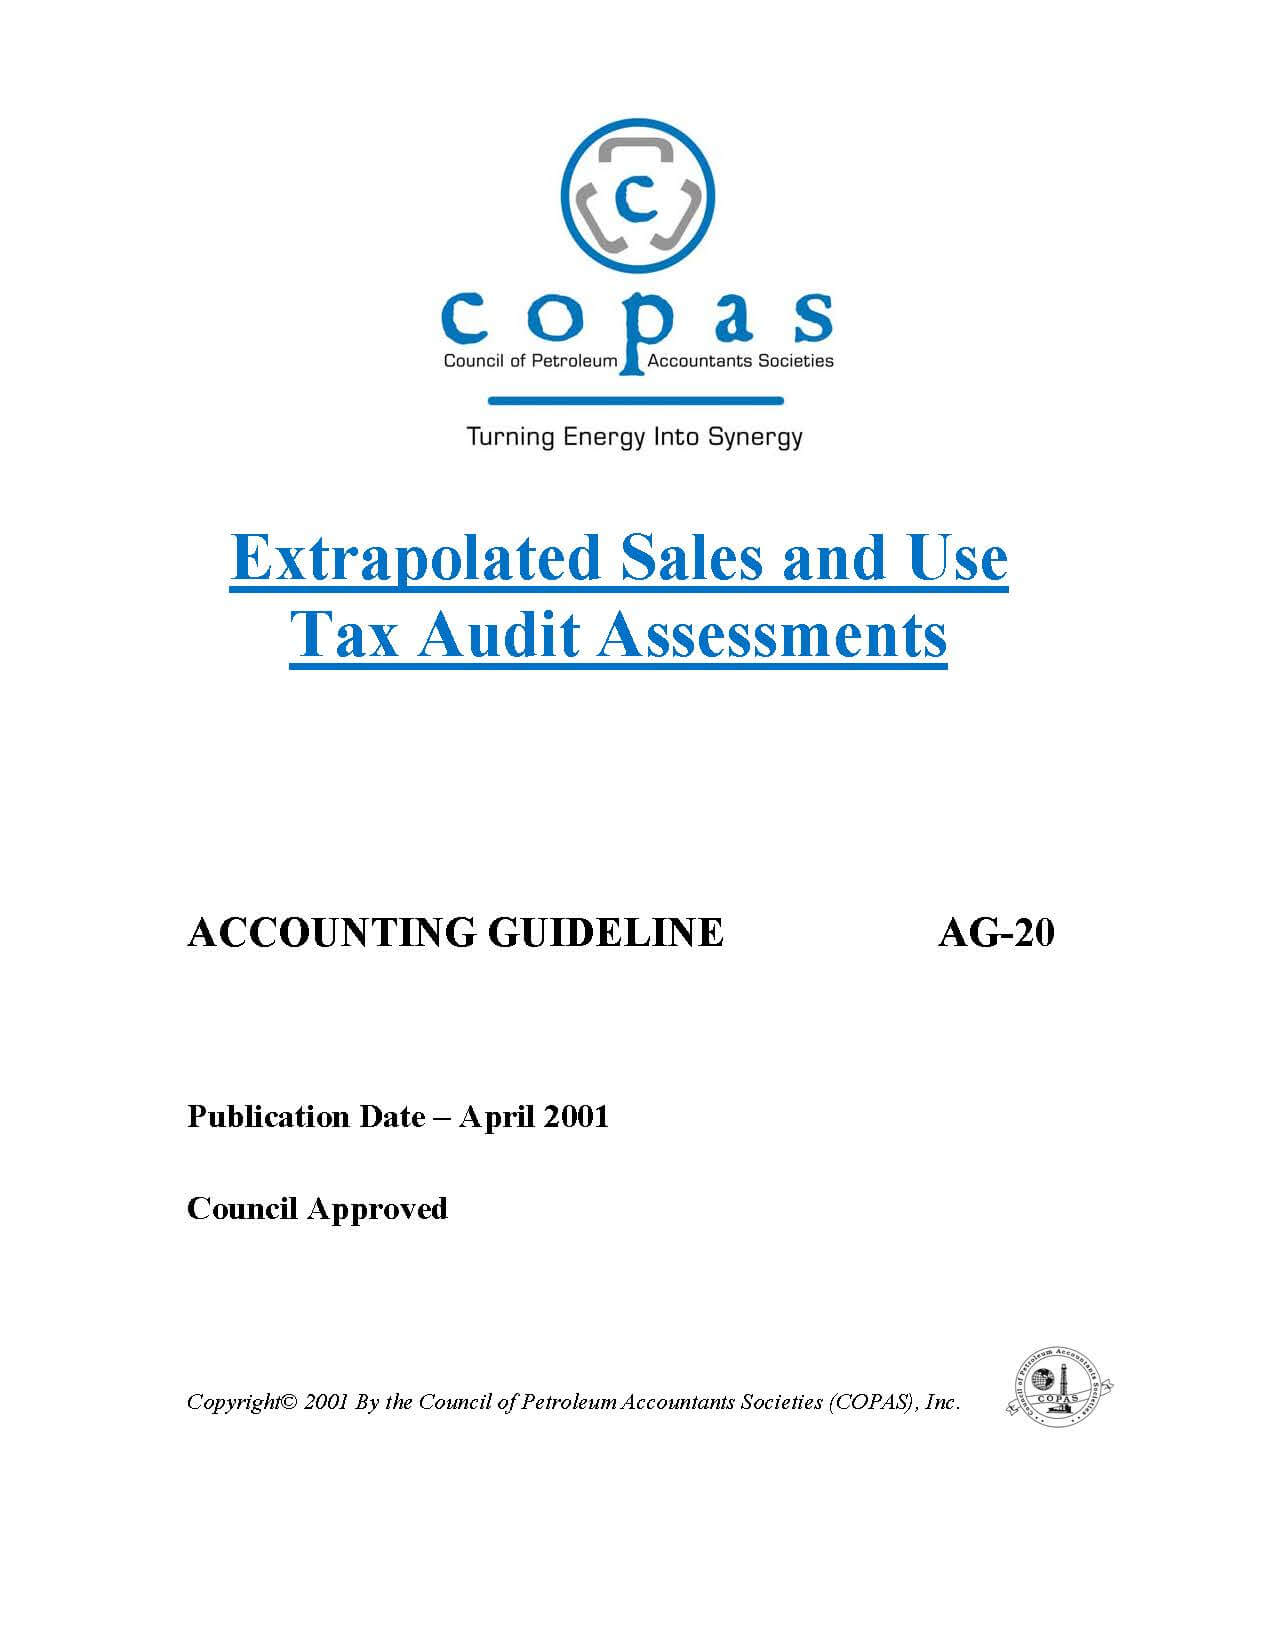 AG-20 Extrapolated Sales and Use Tax Audit Assessments